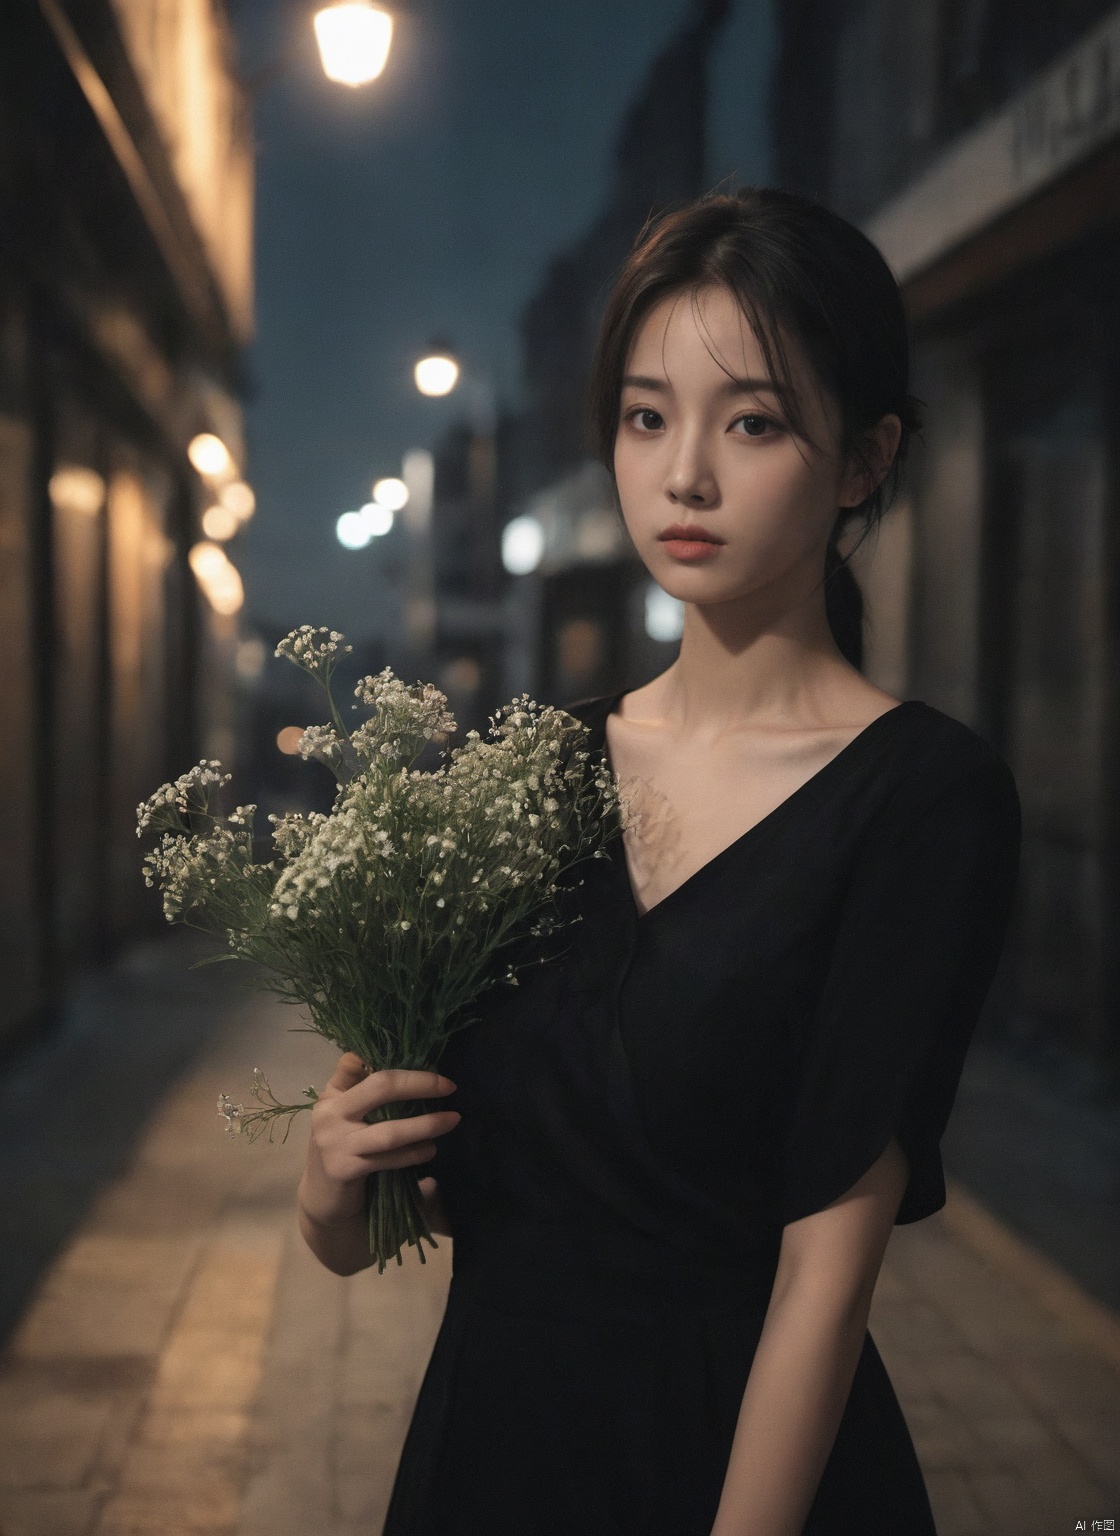  1girl,8k wallpaper,extremely detailed figure, amazing beauty, detailed characters, indoor,black dress, holding flowers, light and shadow, depth of field, light spot, reflection,upper body,nigth,street